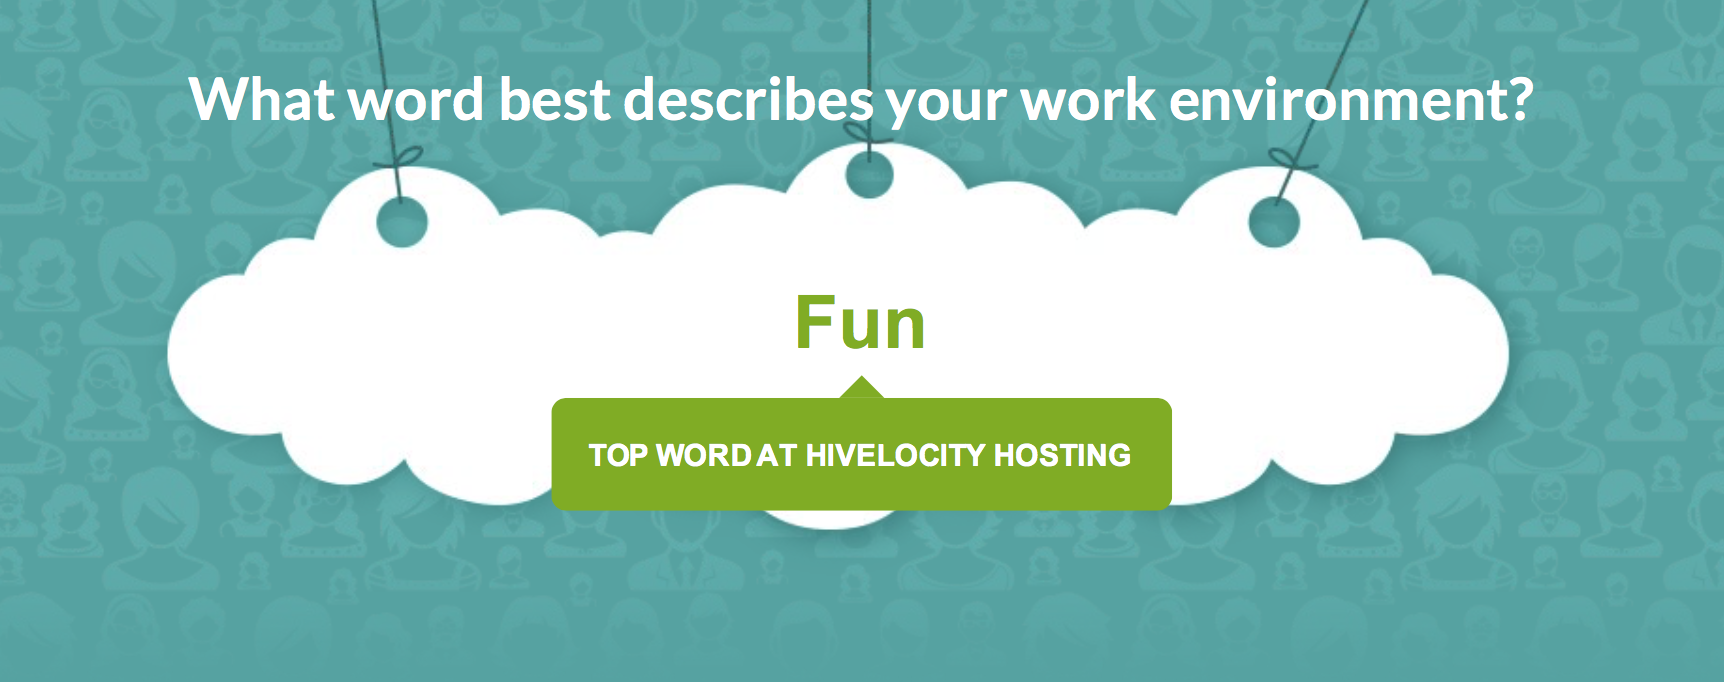 An image of a cloud with the text, "What word best describes your work environment?" and "Fun" highlighted below it.